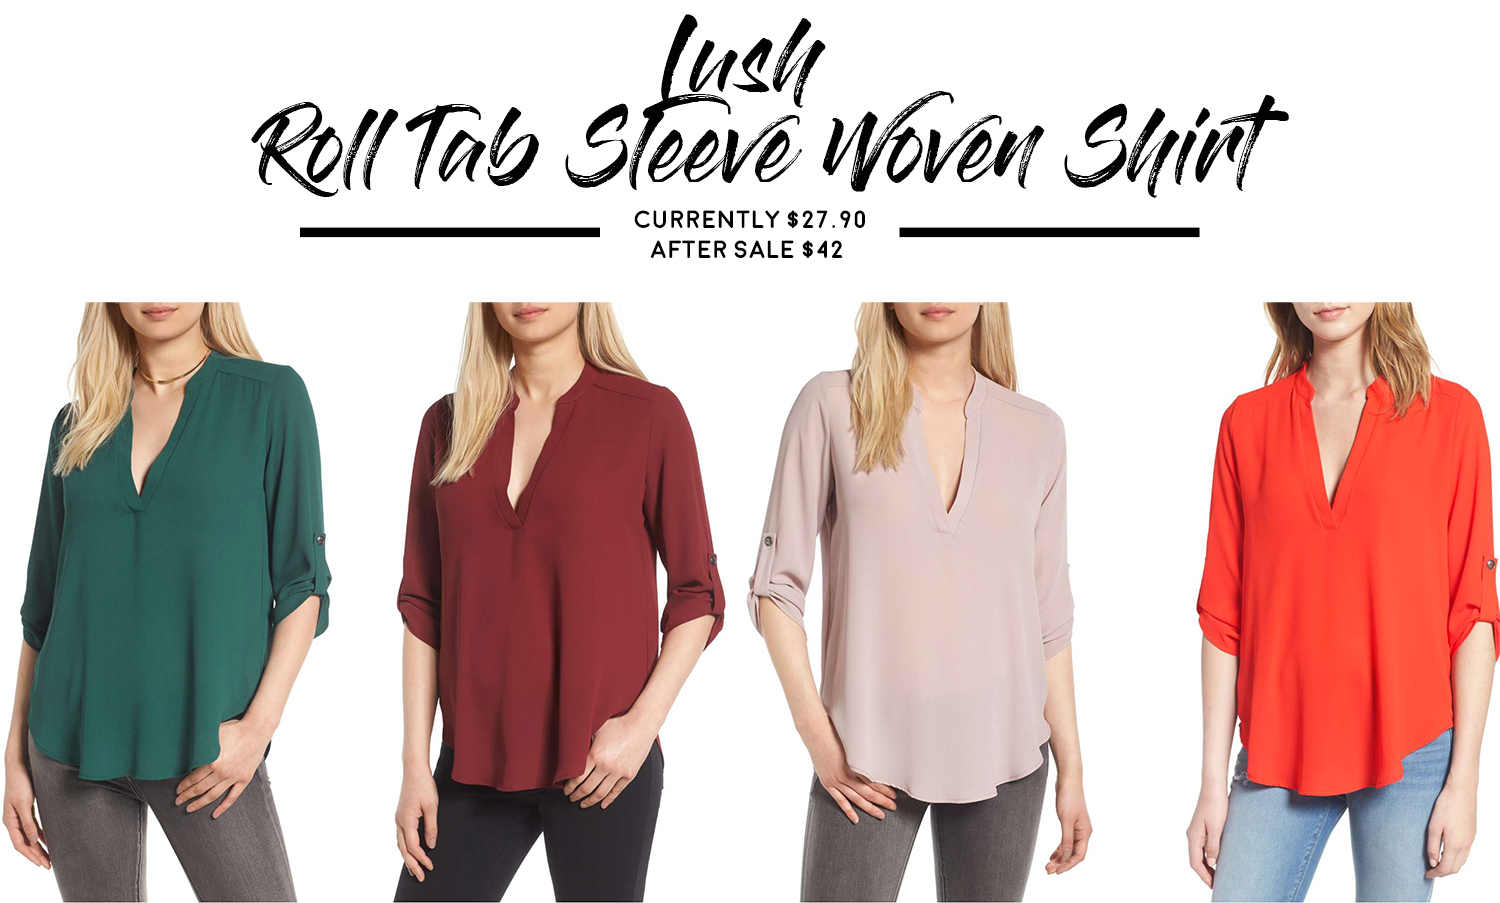 Nordstrom Anniversary Sale 2017 Hits and Misses: Lush Roll Tab Sleeve Woven Shirt